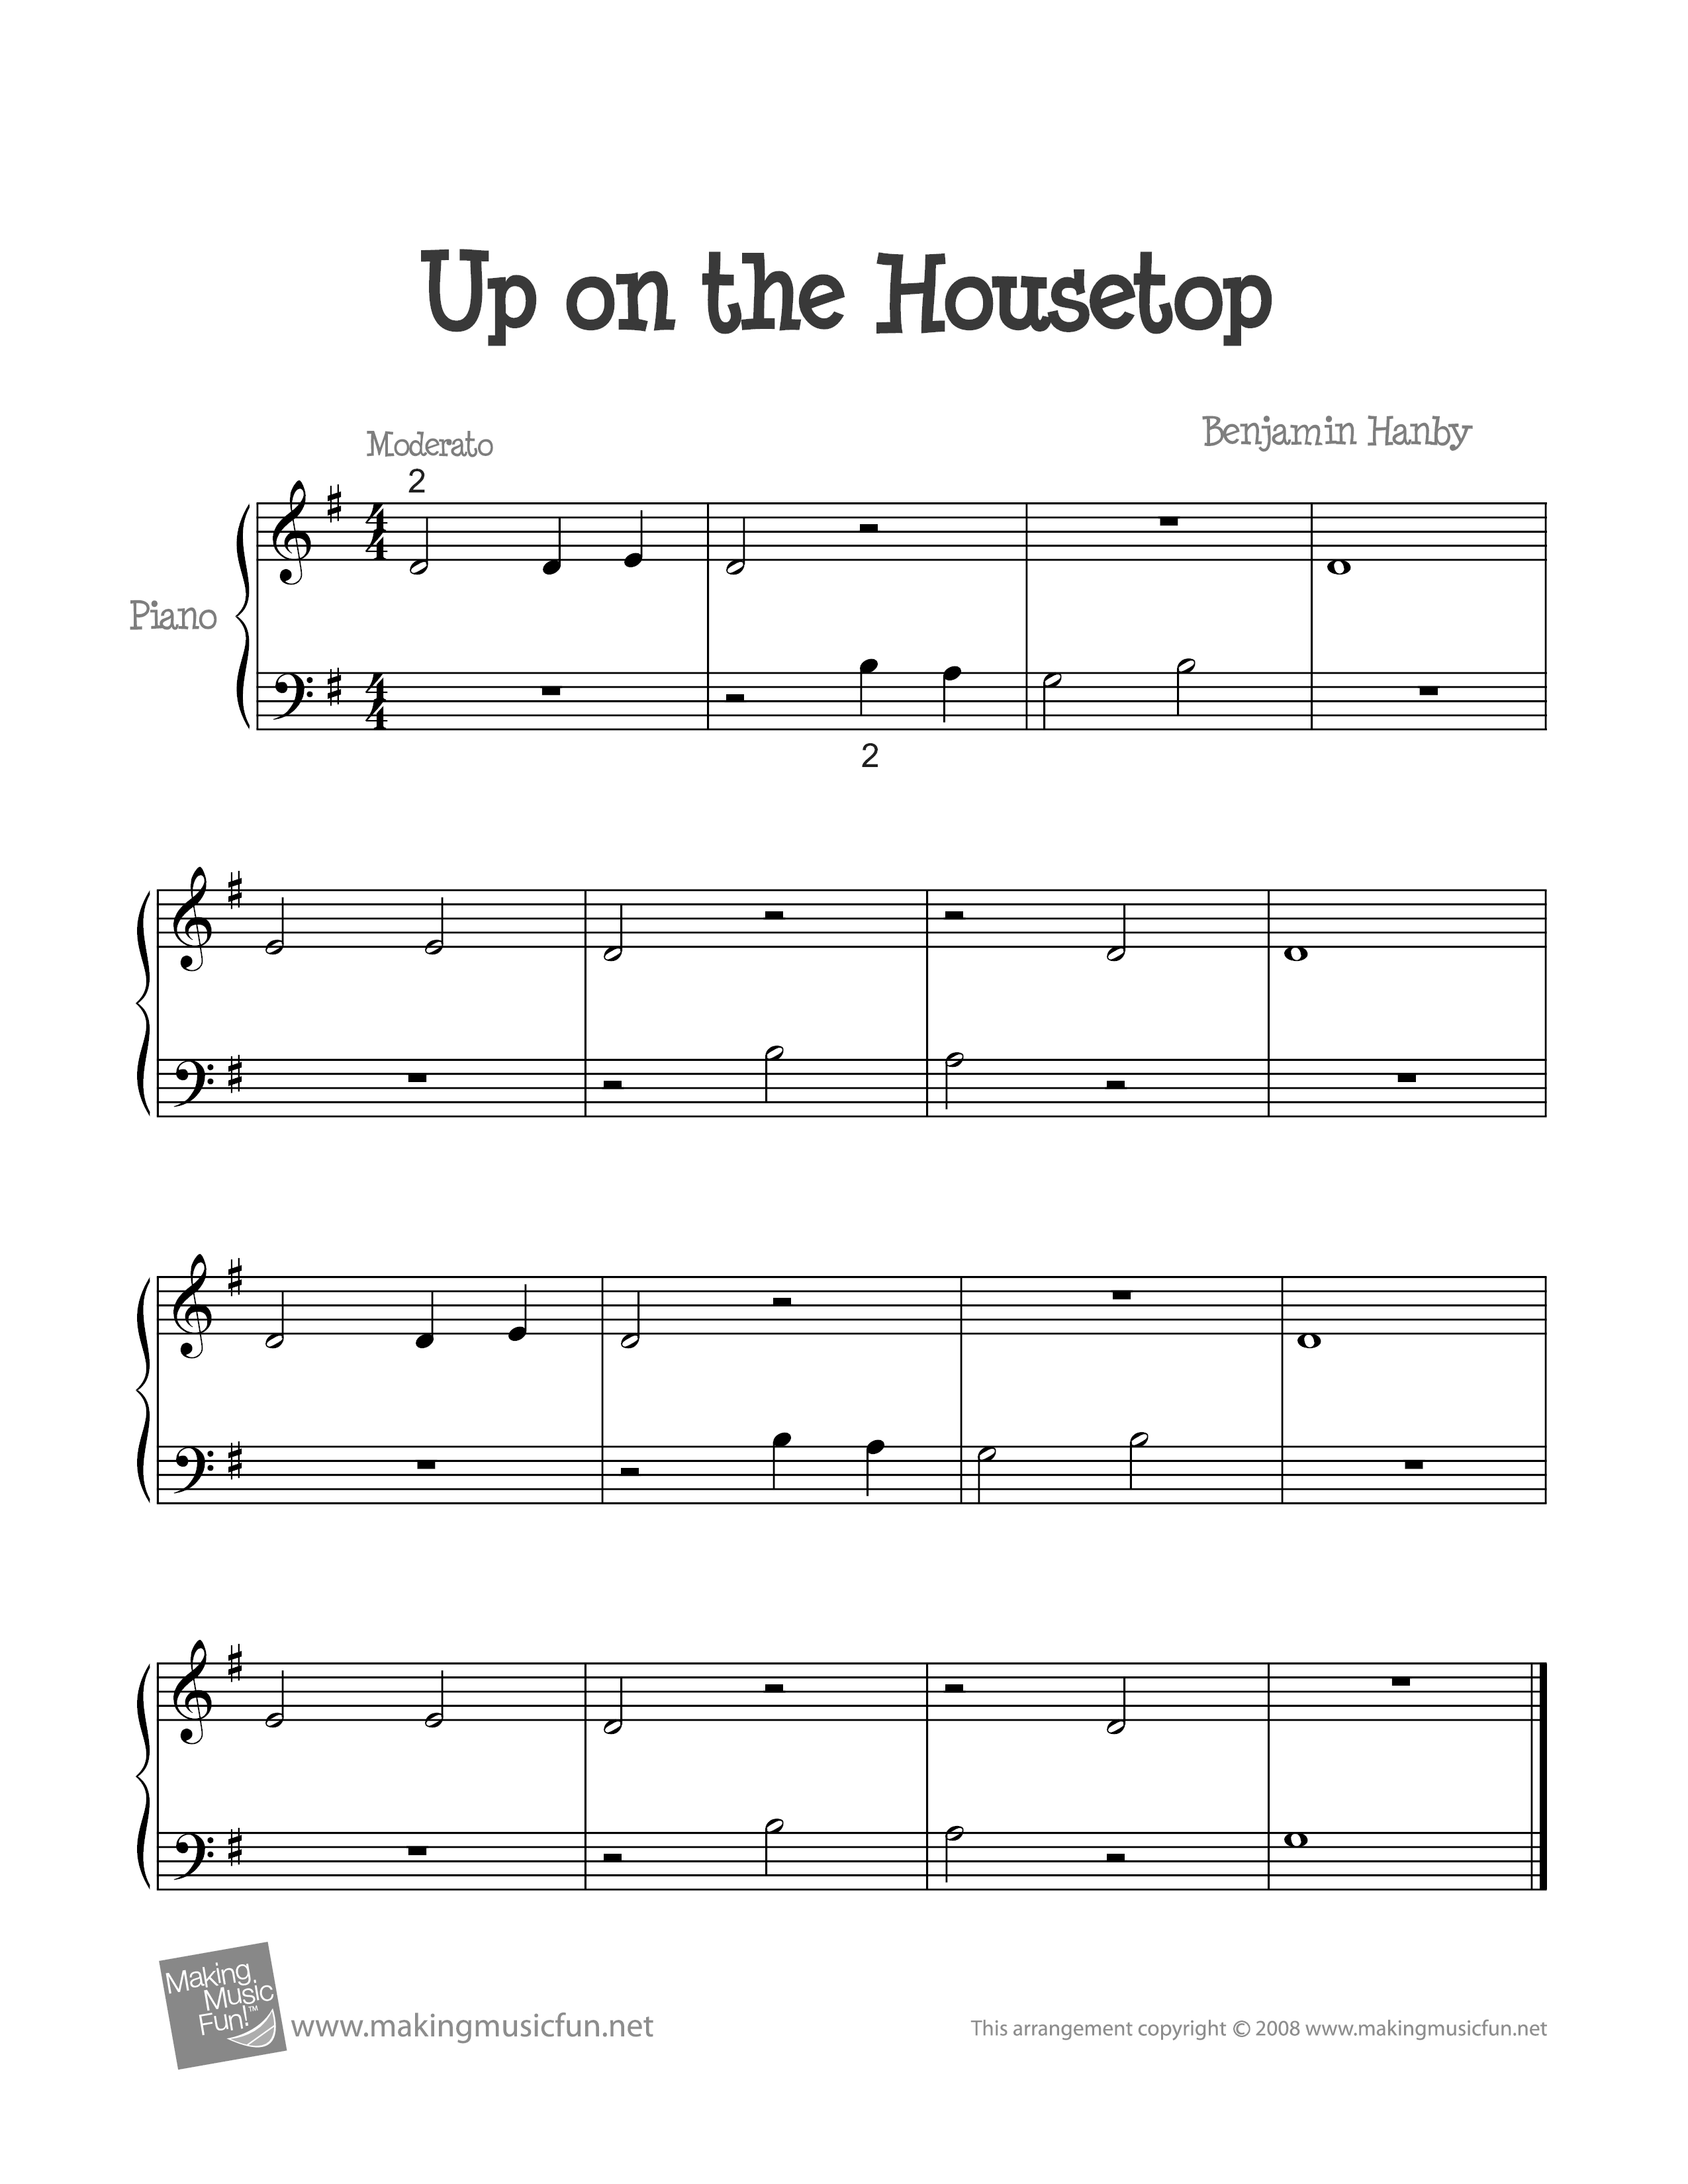 Up on the Housetopピアノ譜